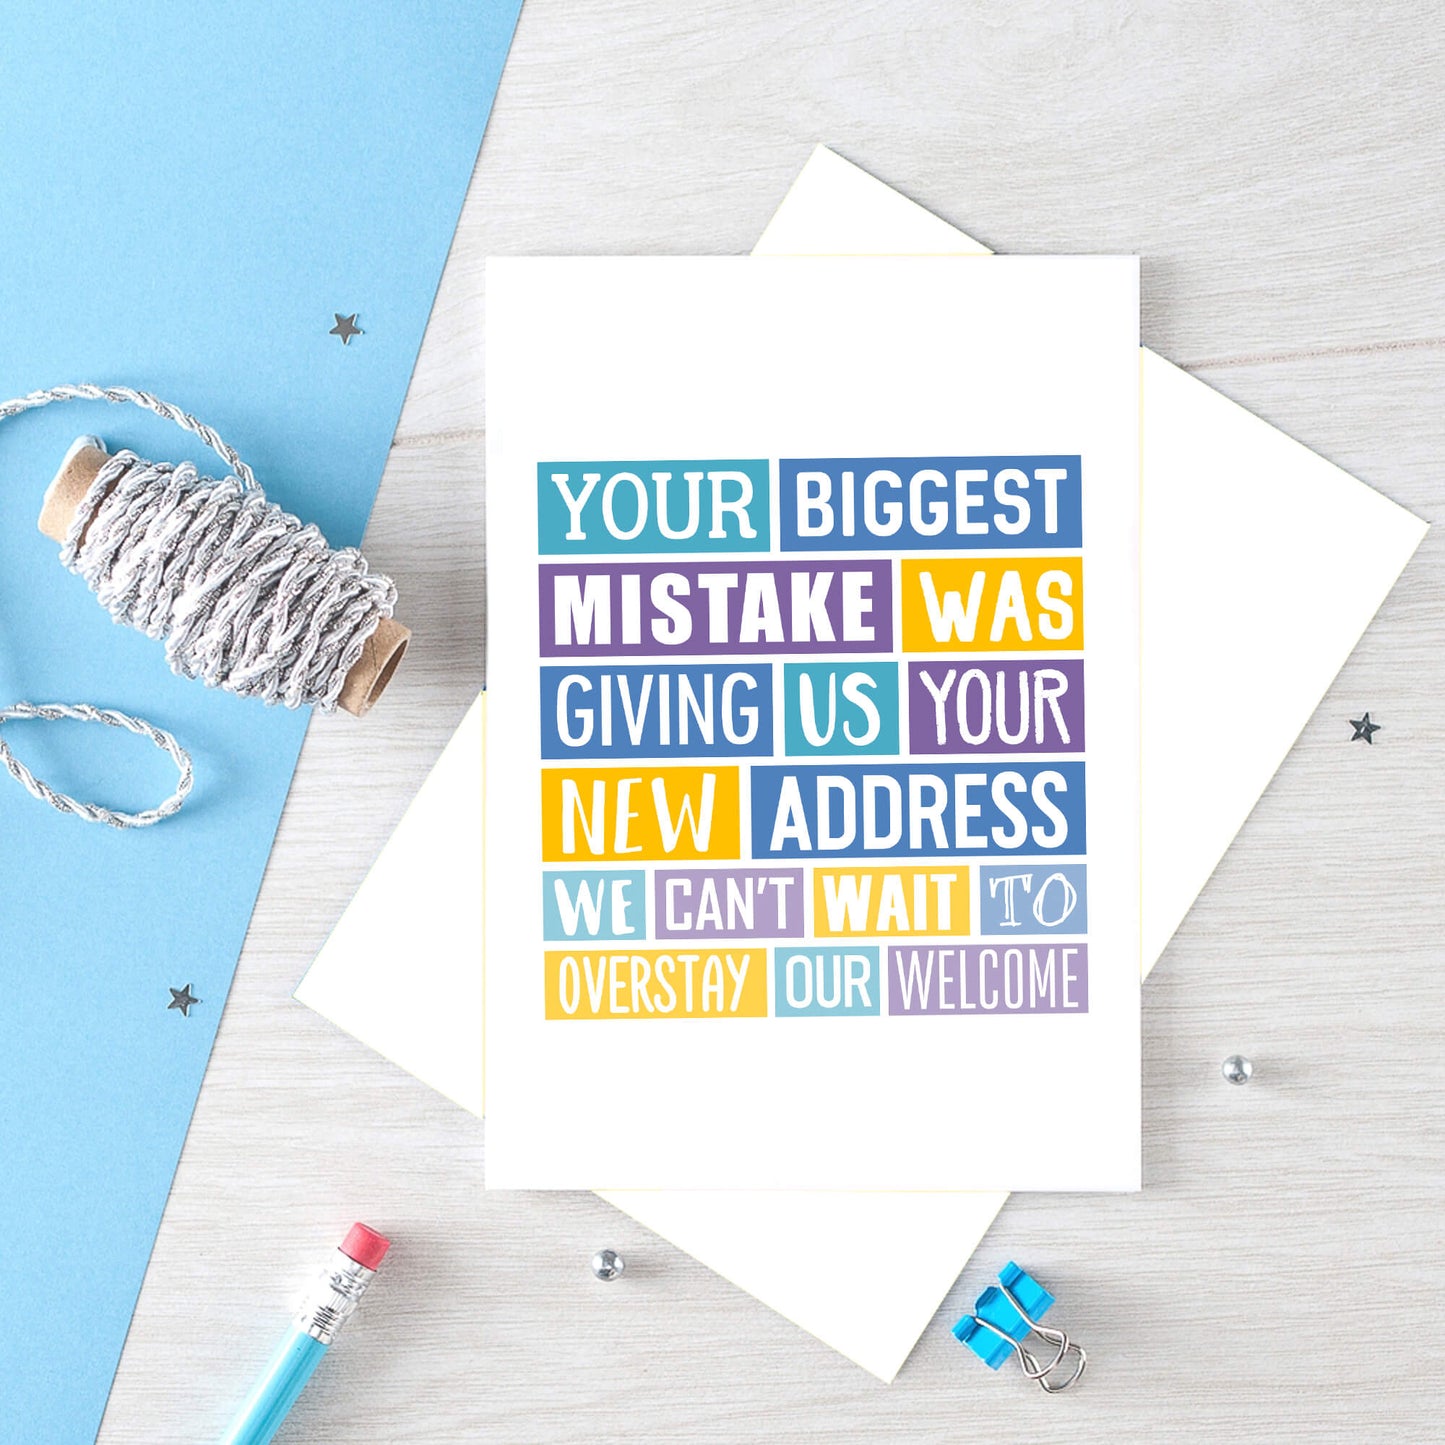 Big New Home Card by SixElevenCreations. Reads Your biggest mistake was giving us your new address. We can't wait to overstay our welcome. Product Code SE0316A5